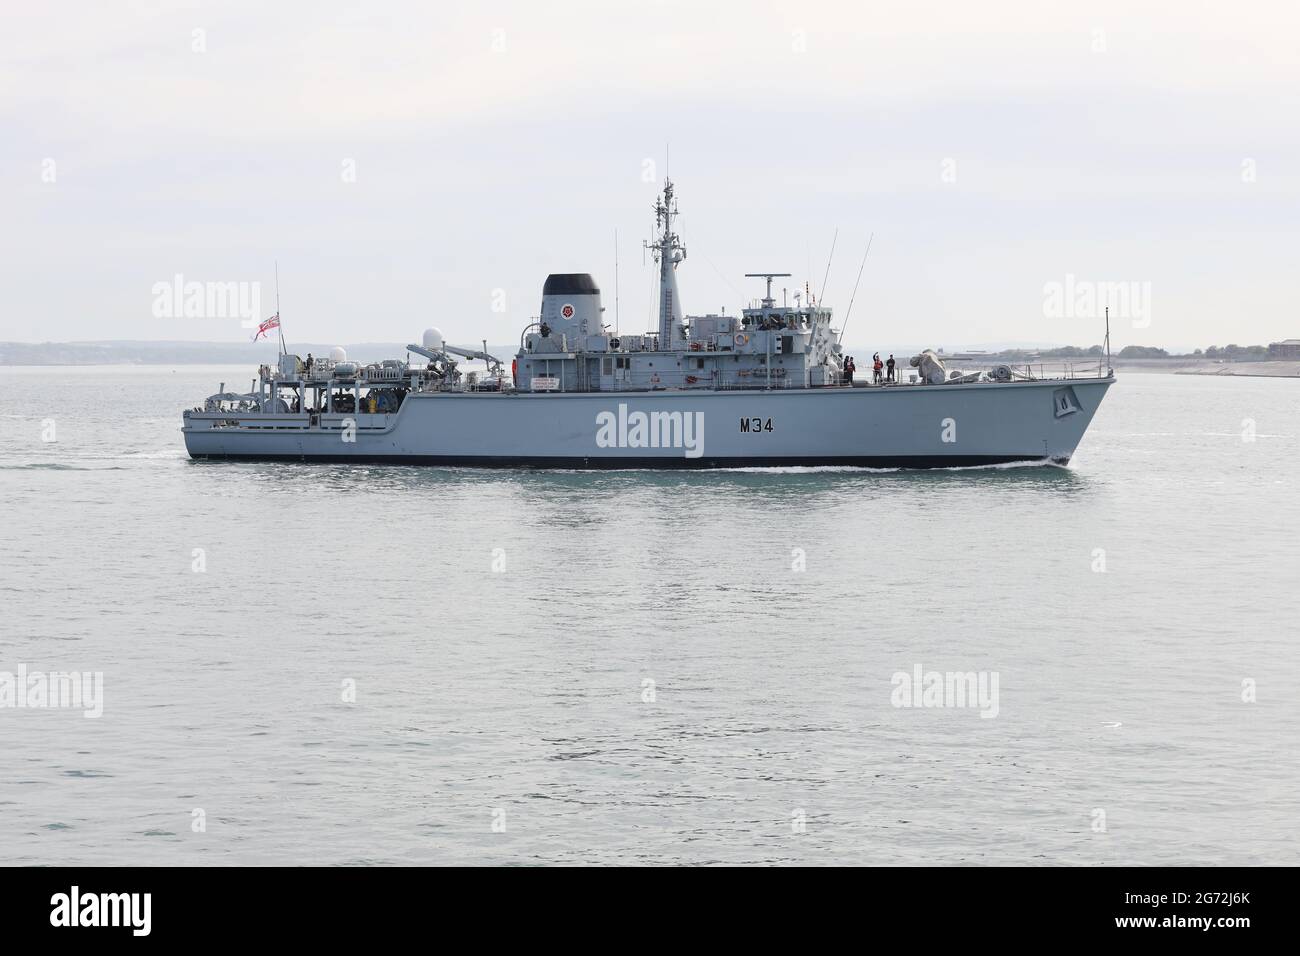 The Royal Navy Mine Counter Measures Vessel HMS MIDDLETON (M34) returns to the Naval Base Stock Photo